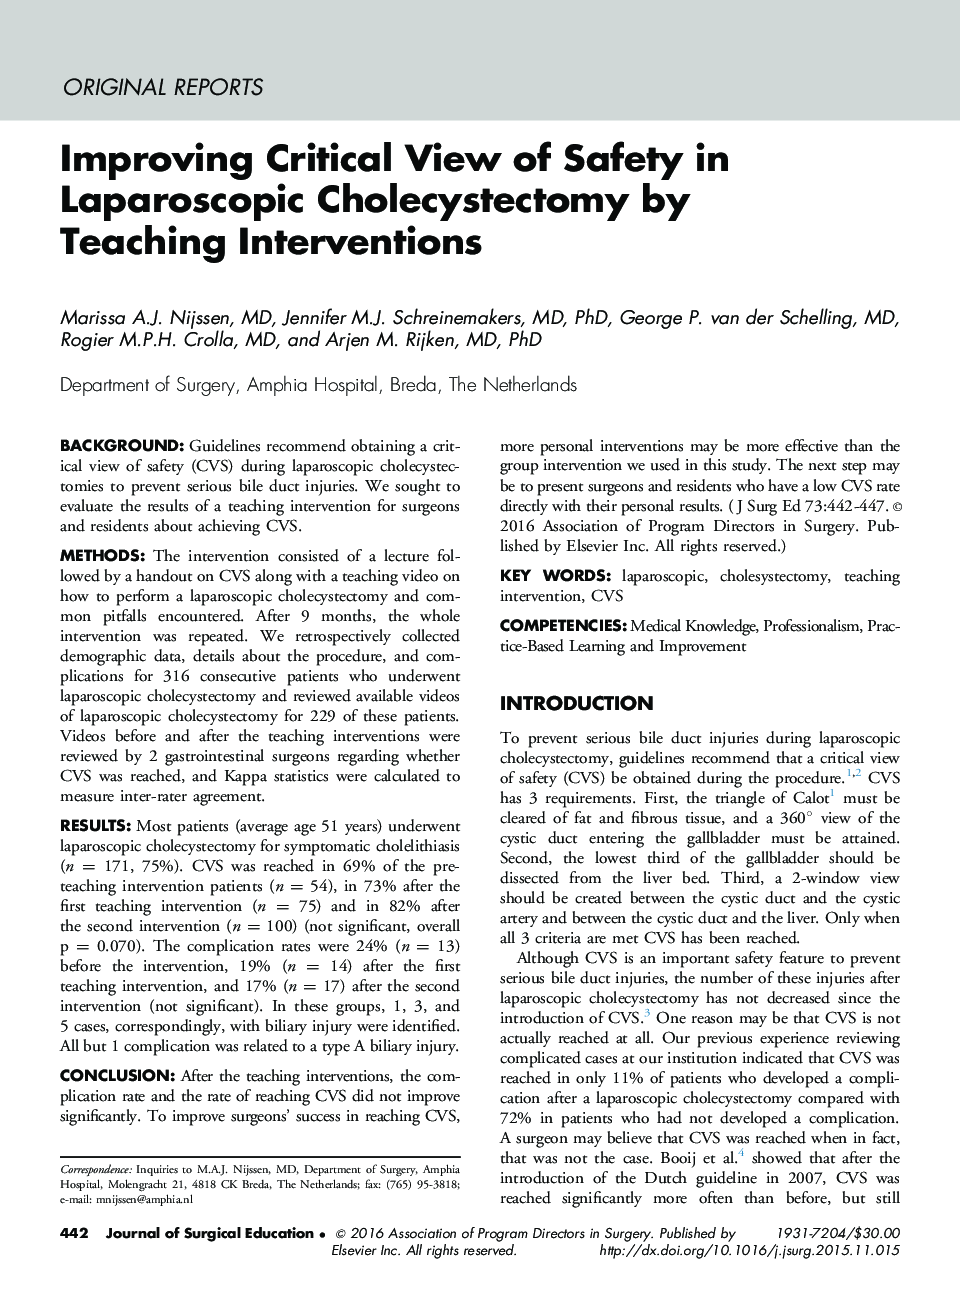 Improving Critical View of Safety in Laparoscopic Cholecystectomy by Teaching Interventions